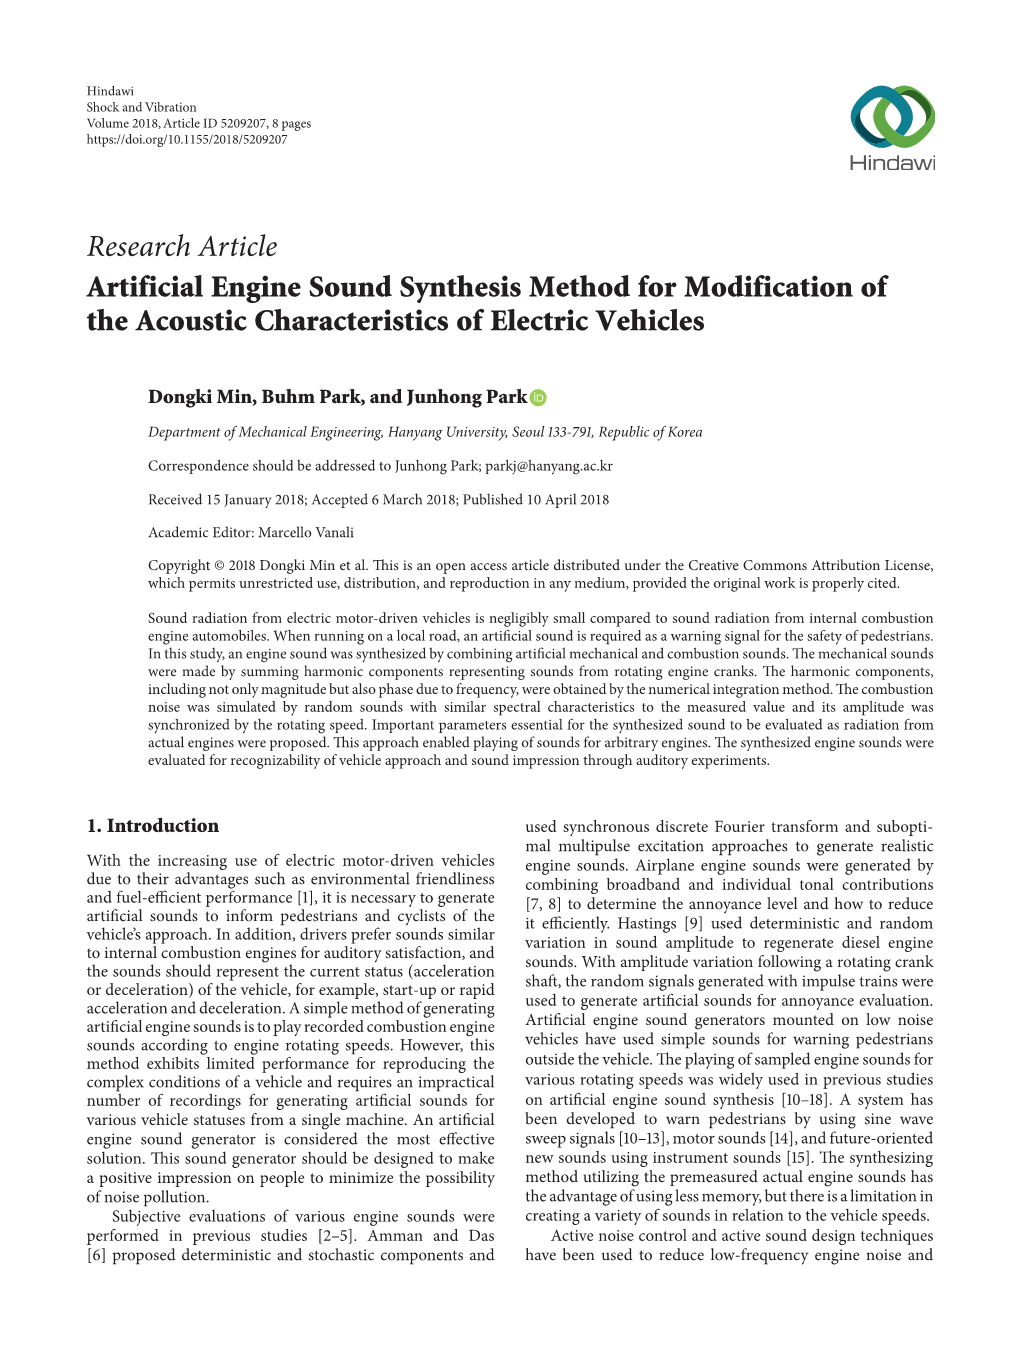 Research Article Artificial Engine Sound Synthesis Method for Modification of the Acoustic Characteristics of Electric Vehicles